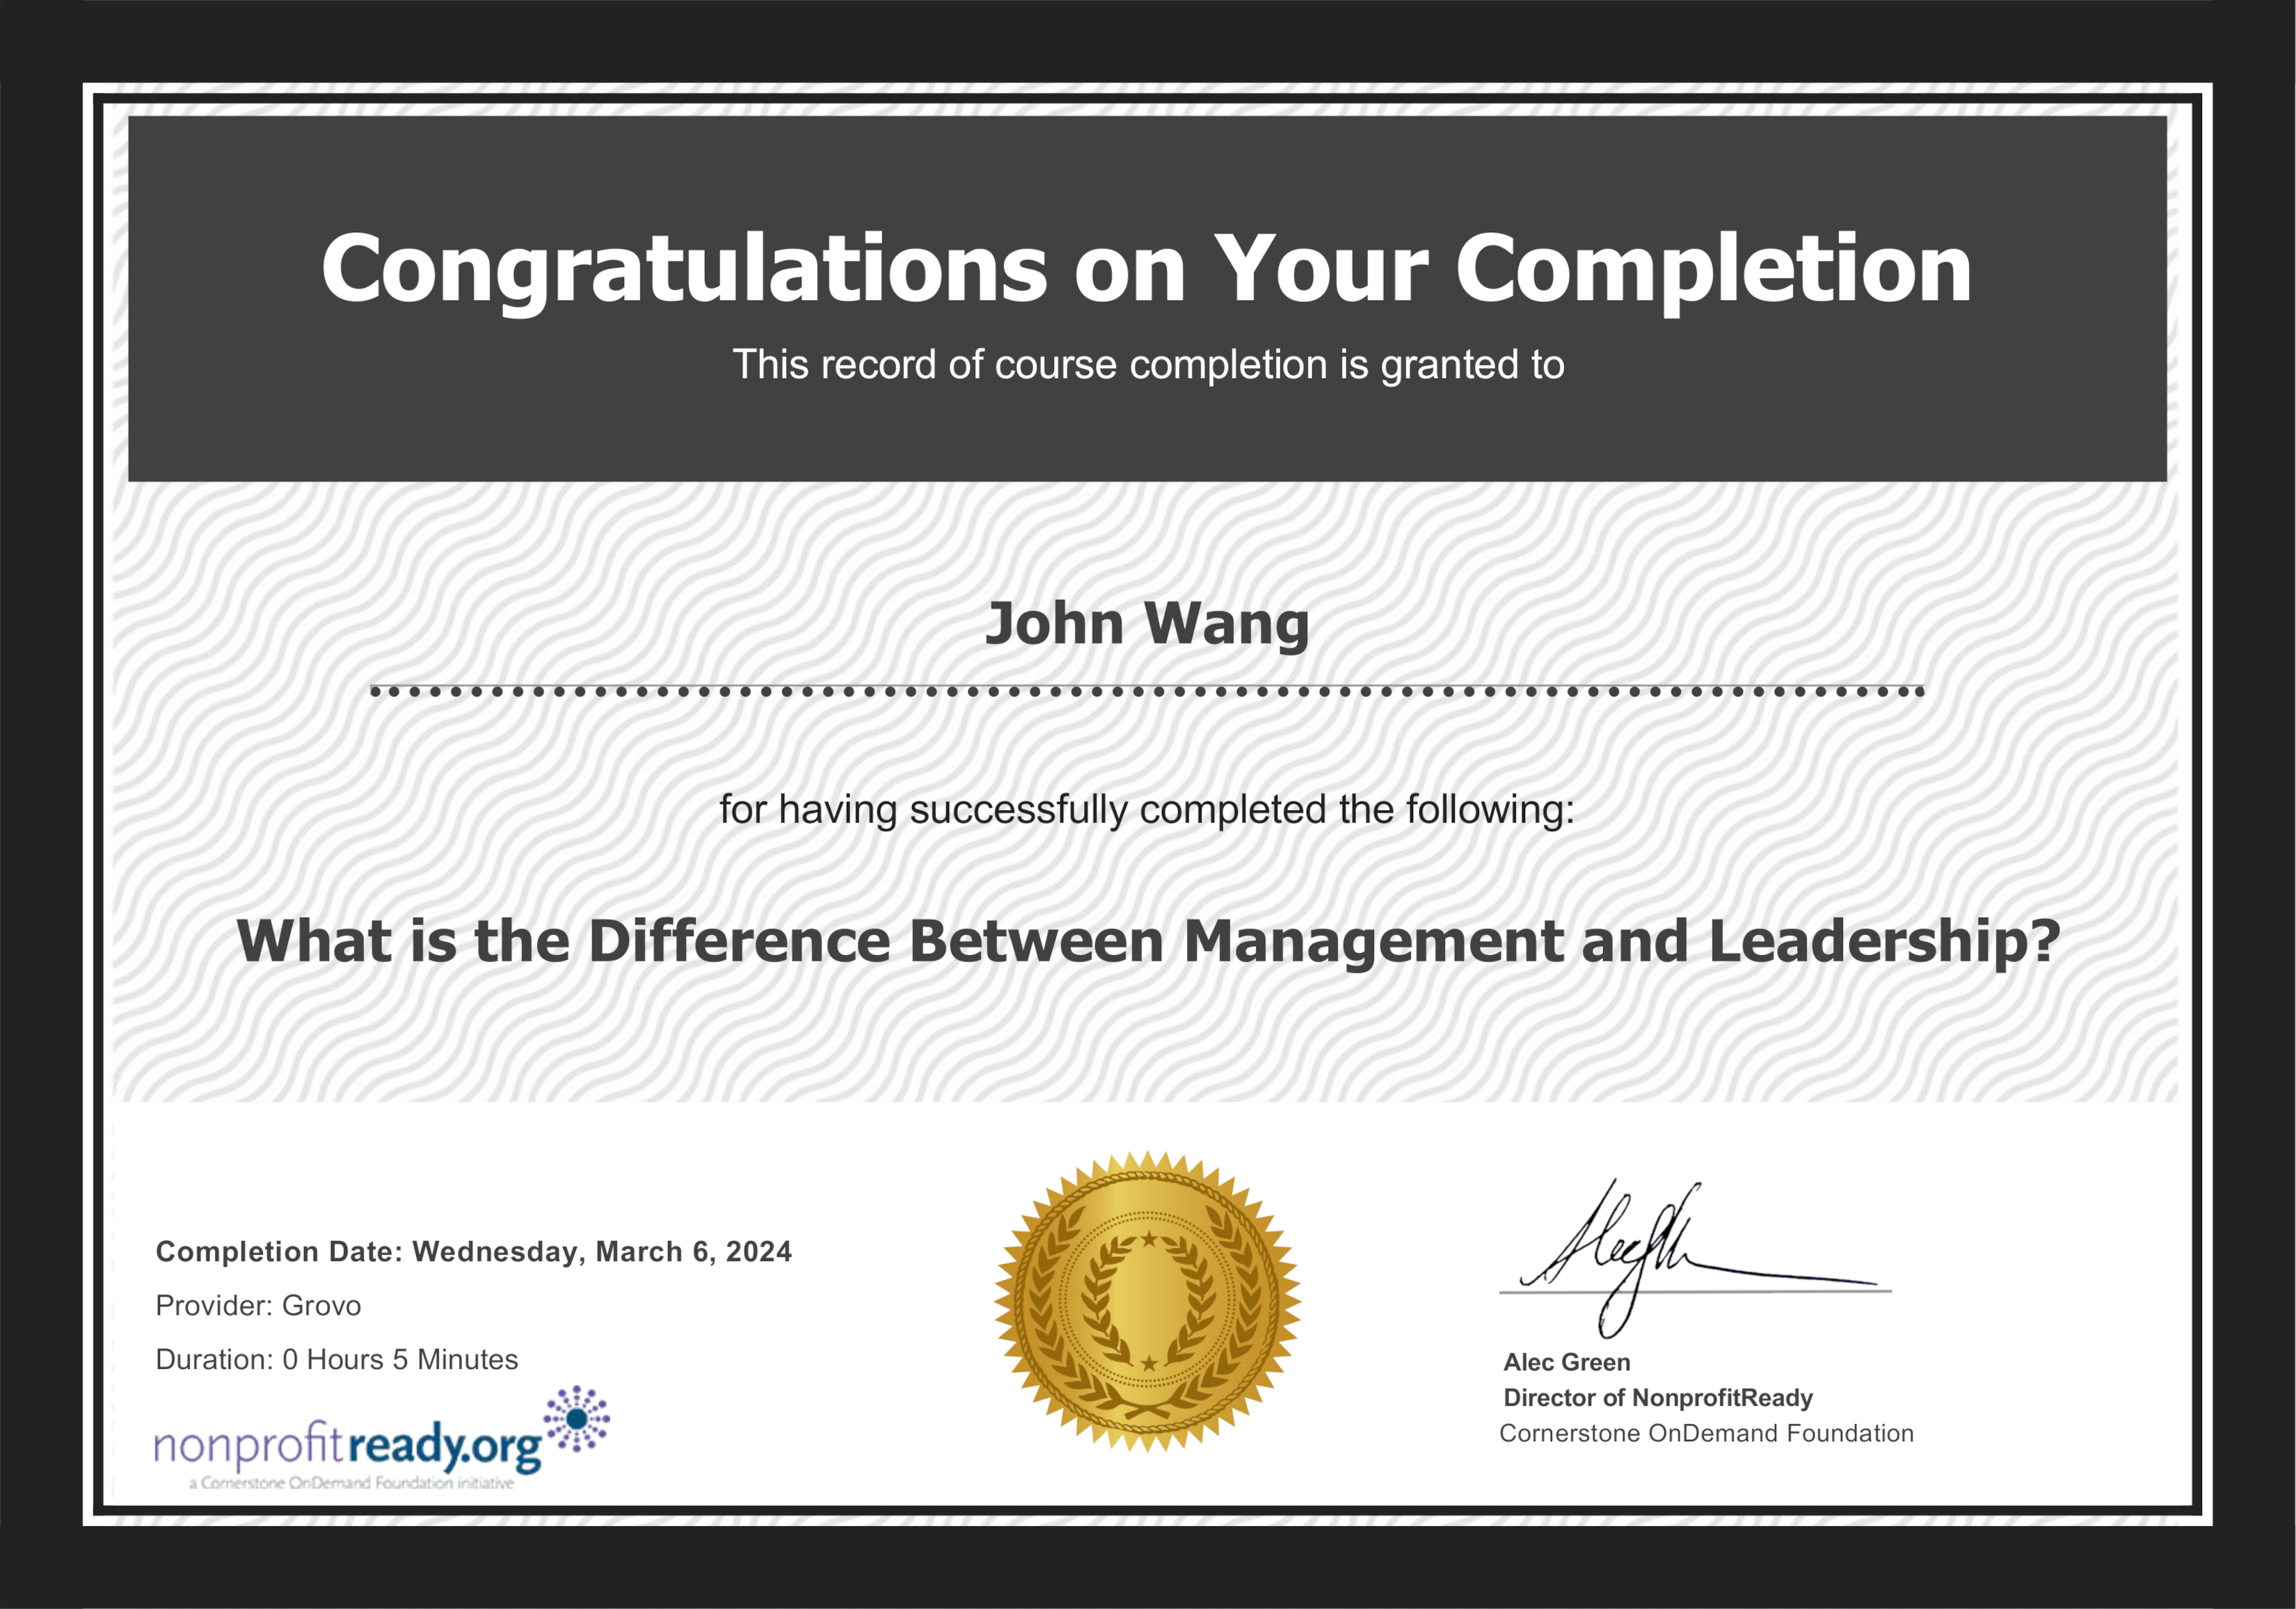 John's What is the Difference Between Management and Leadership from NonprofitReady